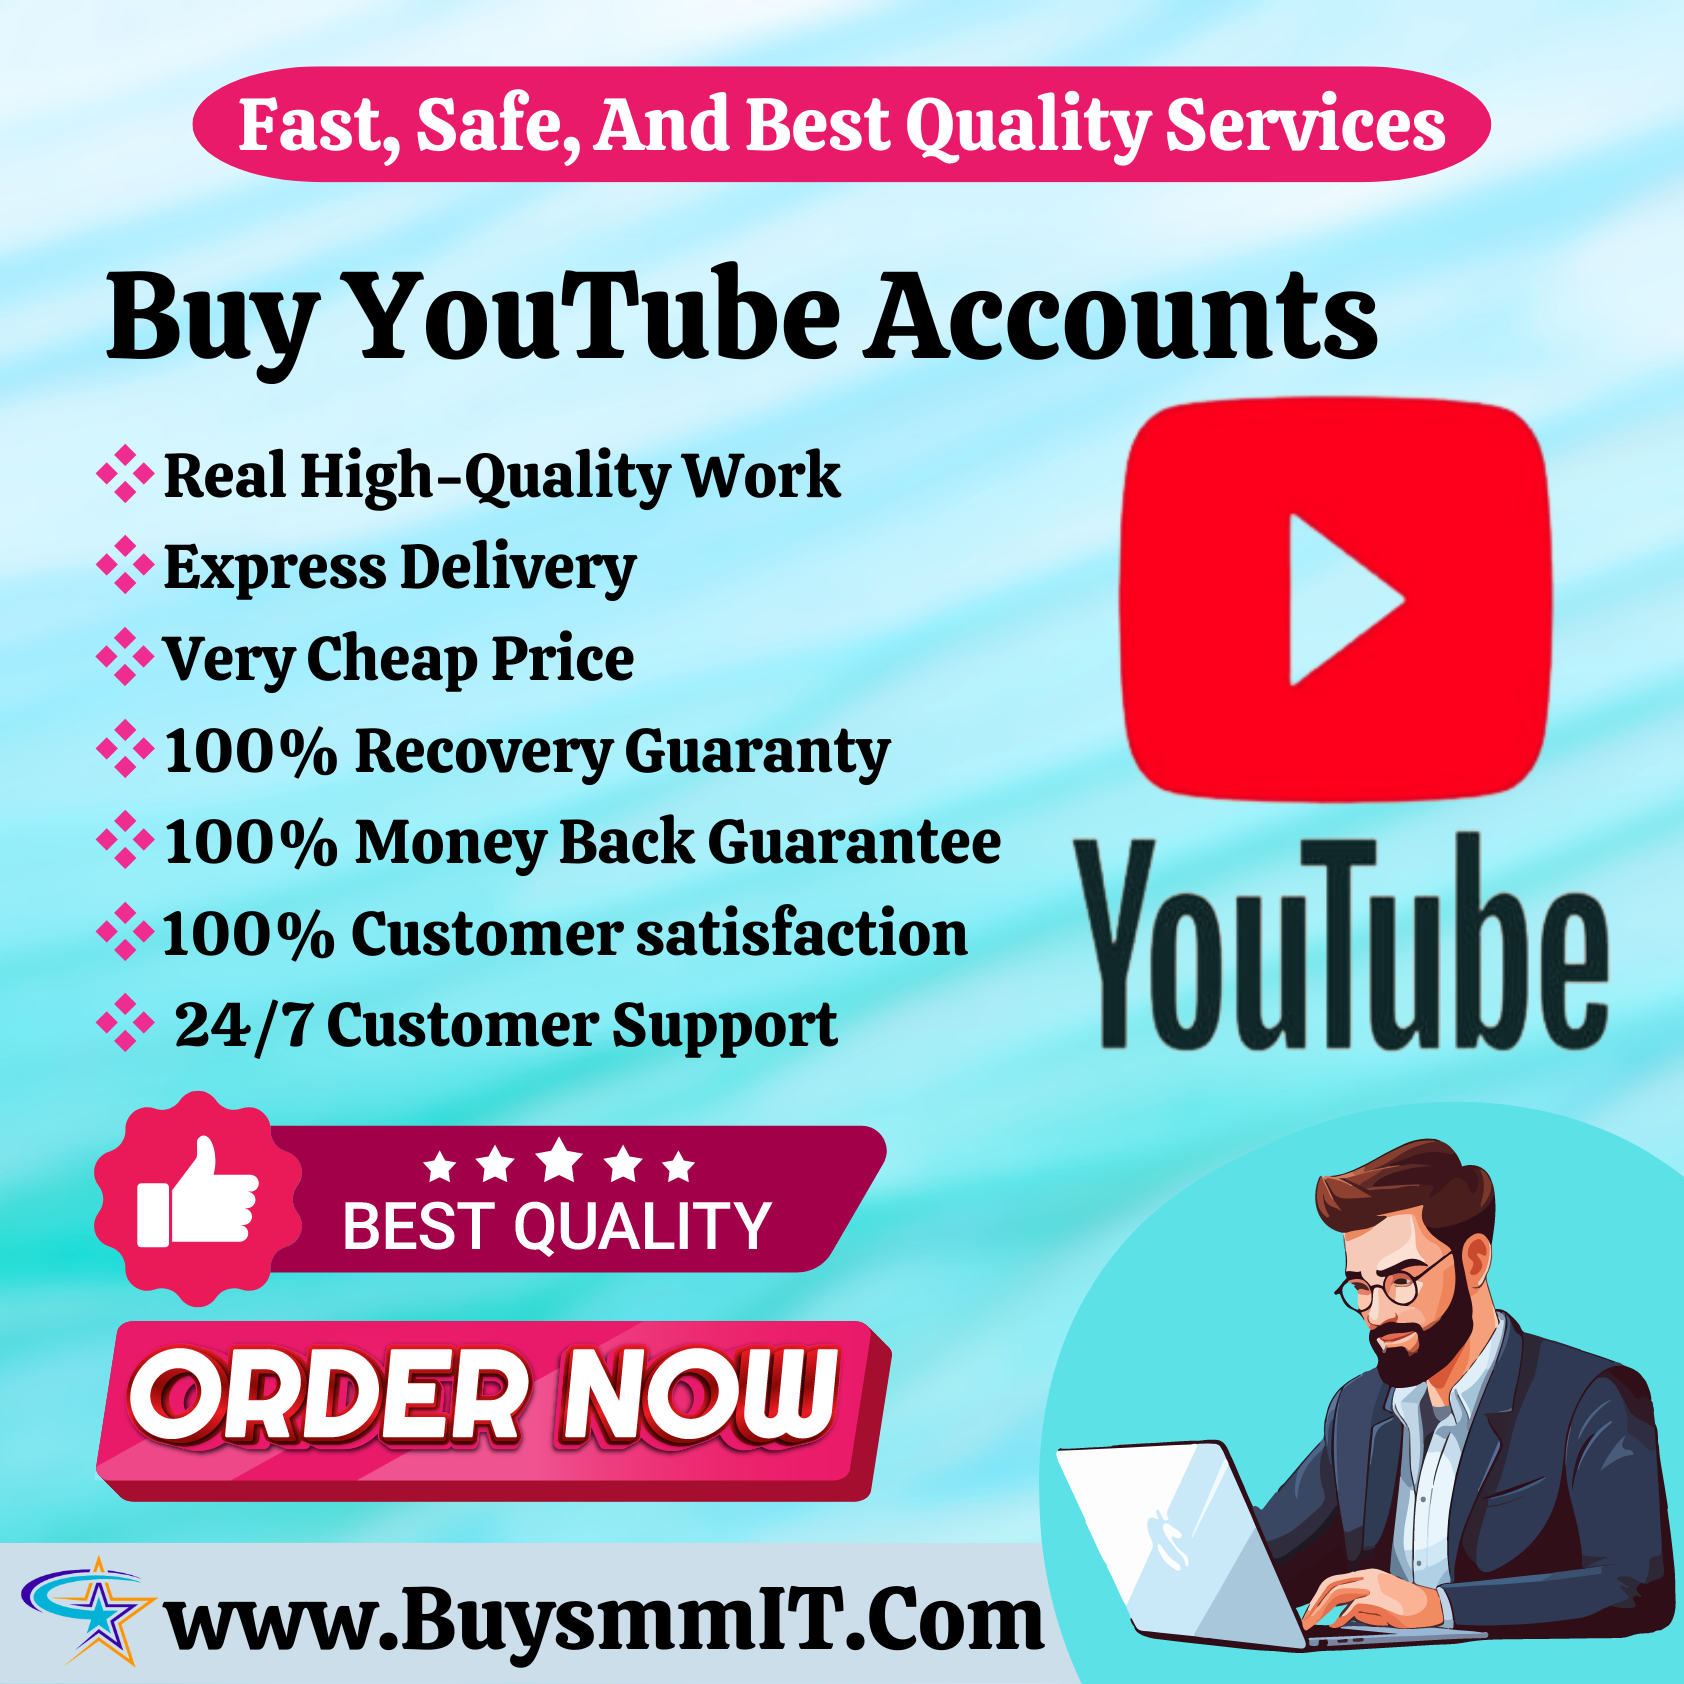 Buy YouTube Accounts - Safe,Old,Very Low Price,